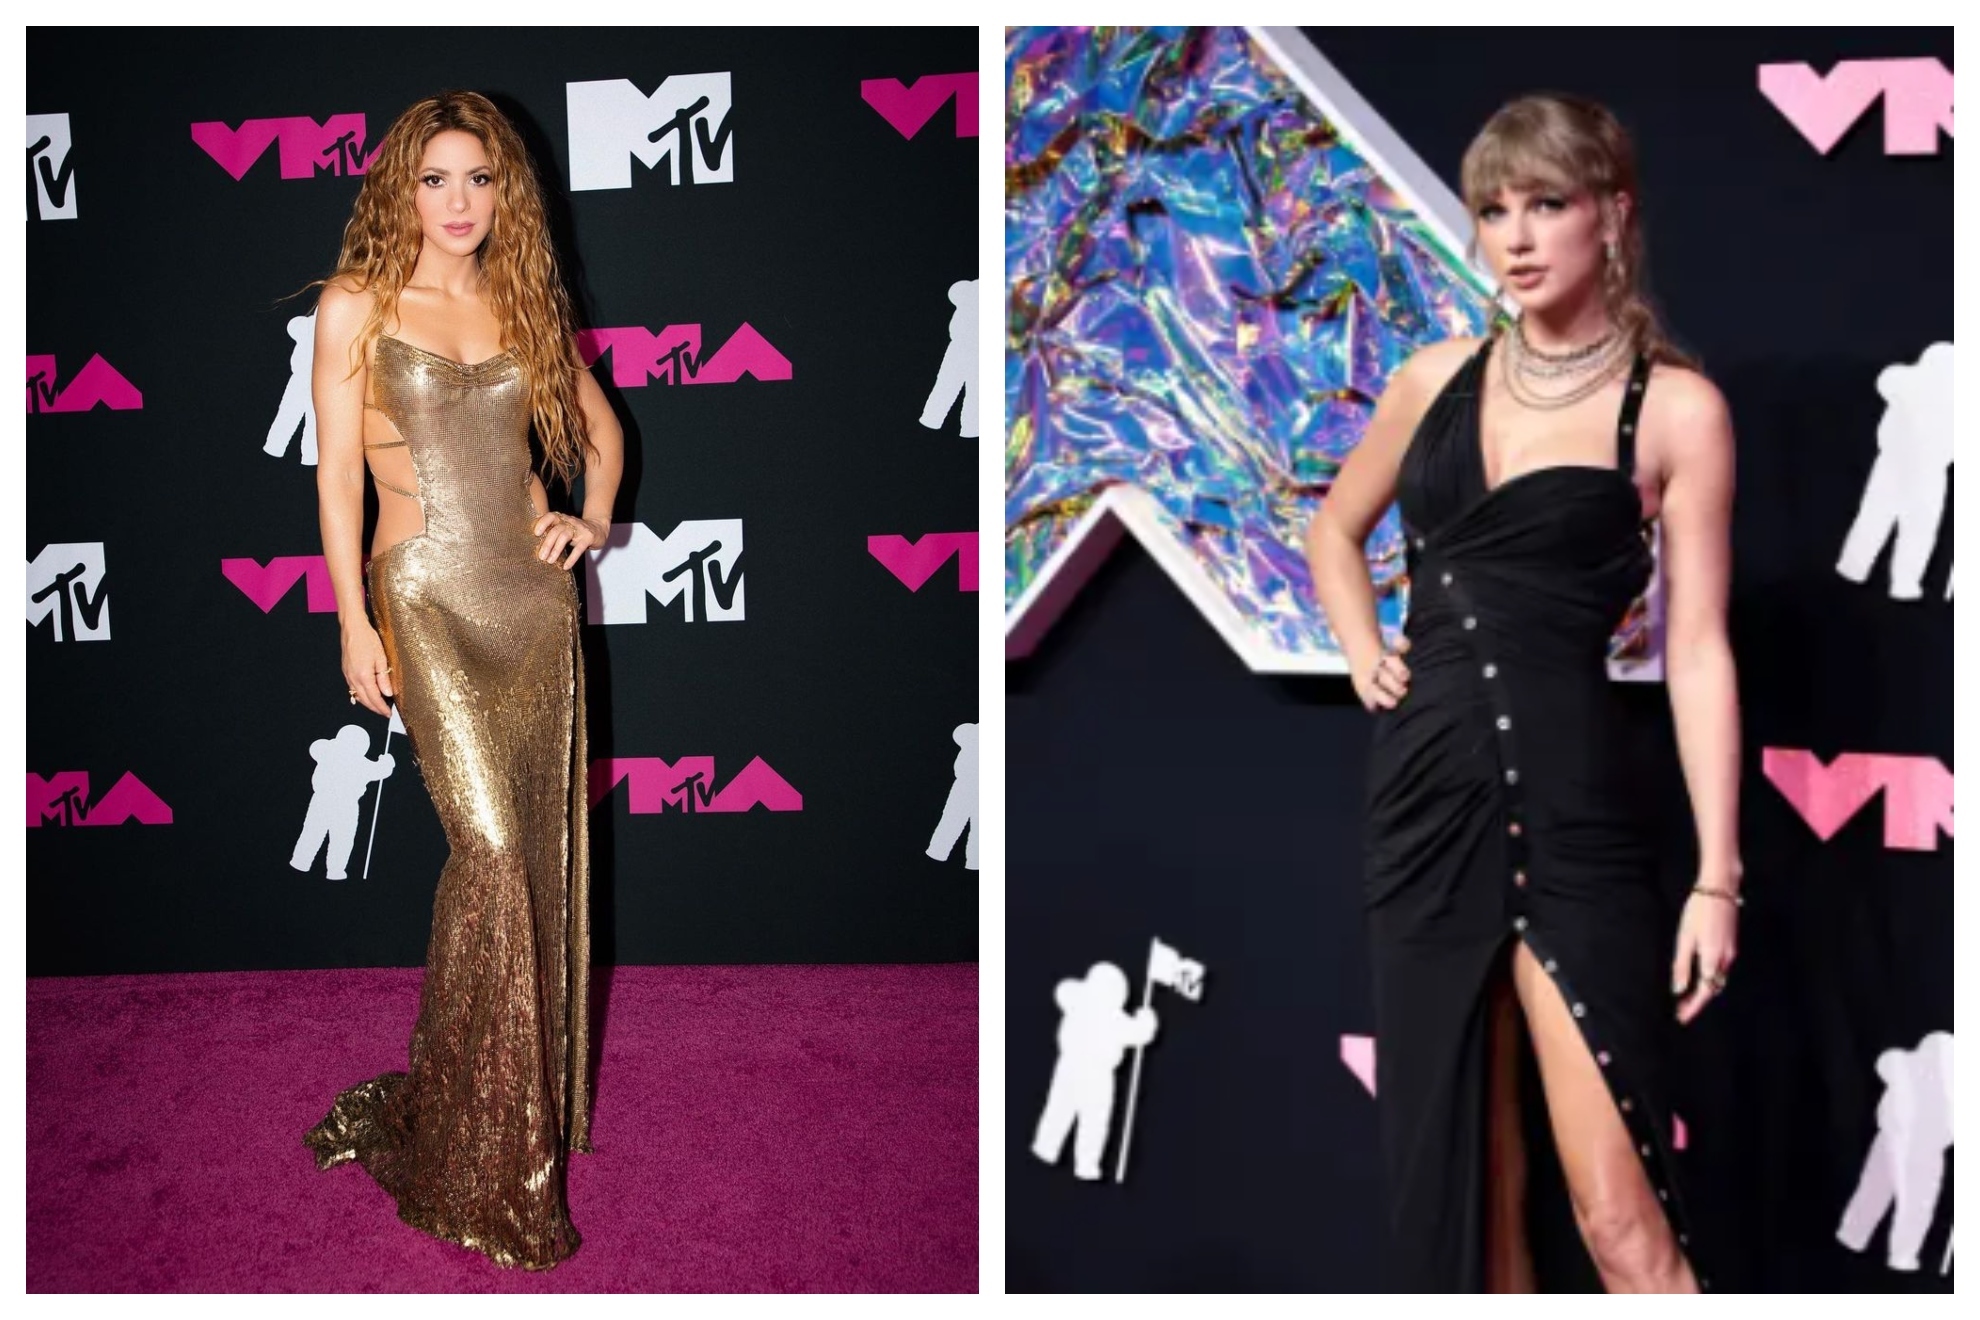 The hottest looks from the VMAs star-studded line up: Shakira, Selena Gomez and Taylor Swift steal the show